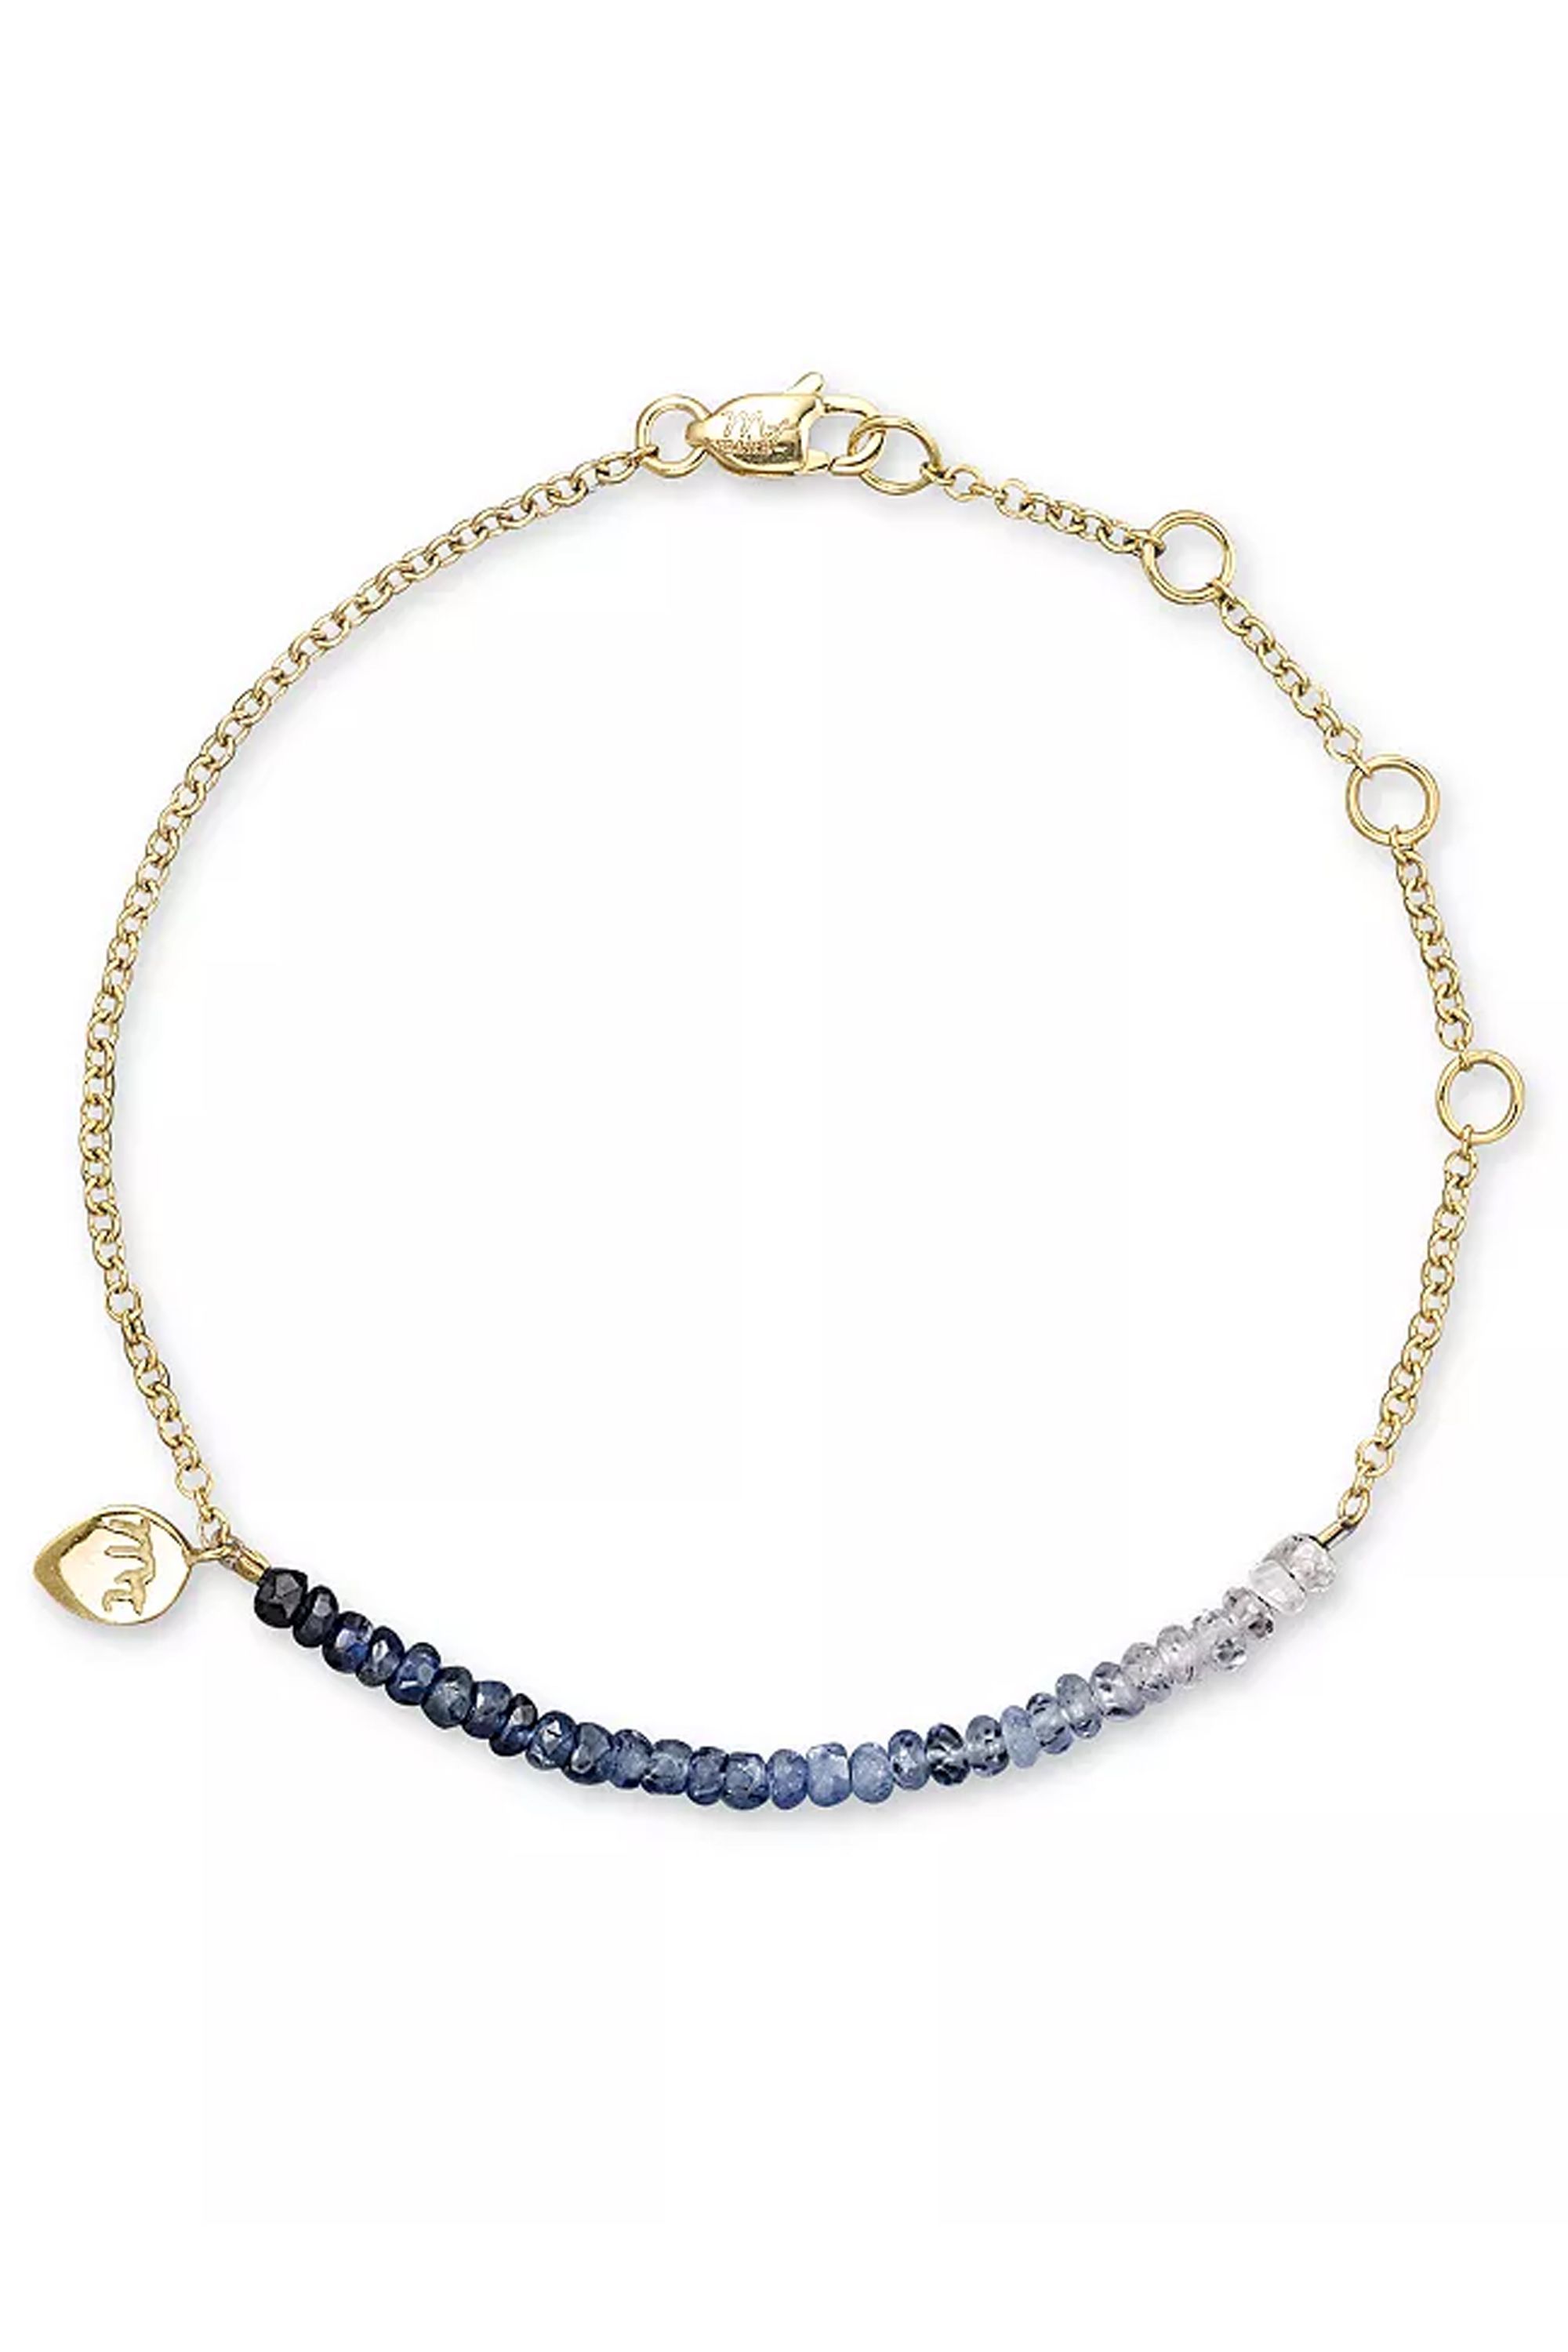 Blue Sapphire and 14K Yellow Gold Bracelet